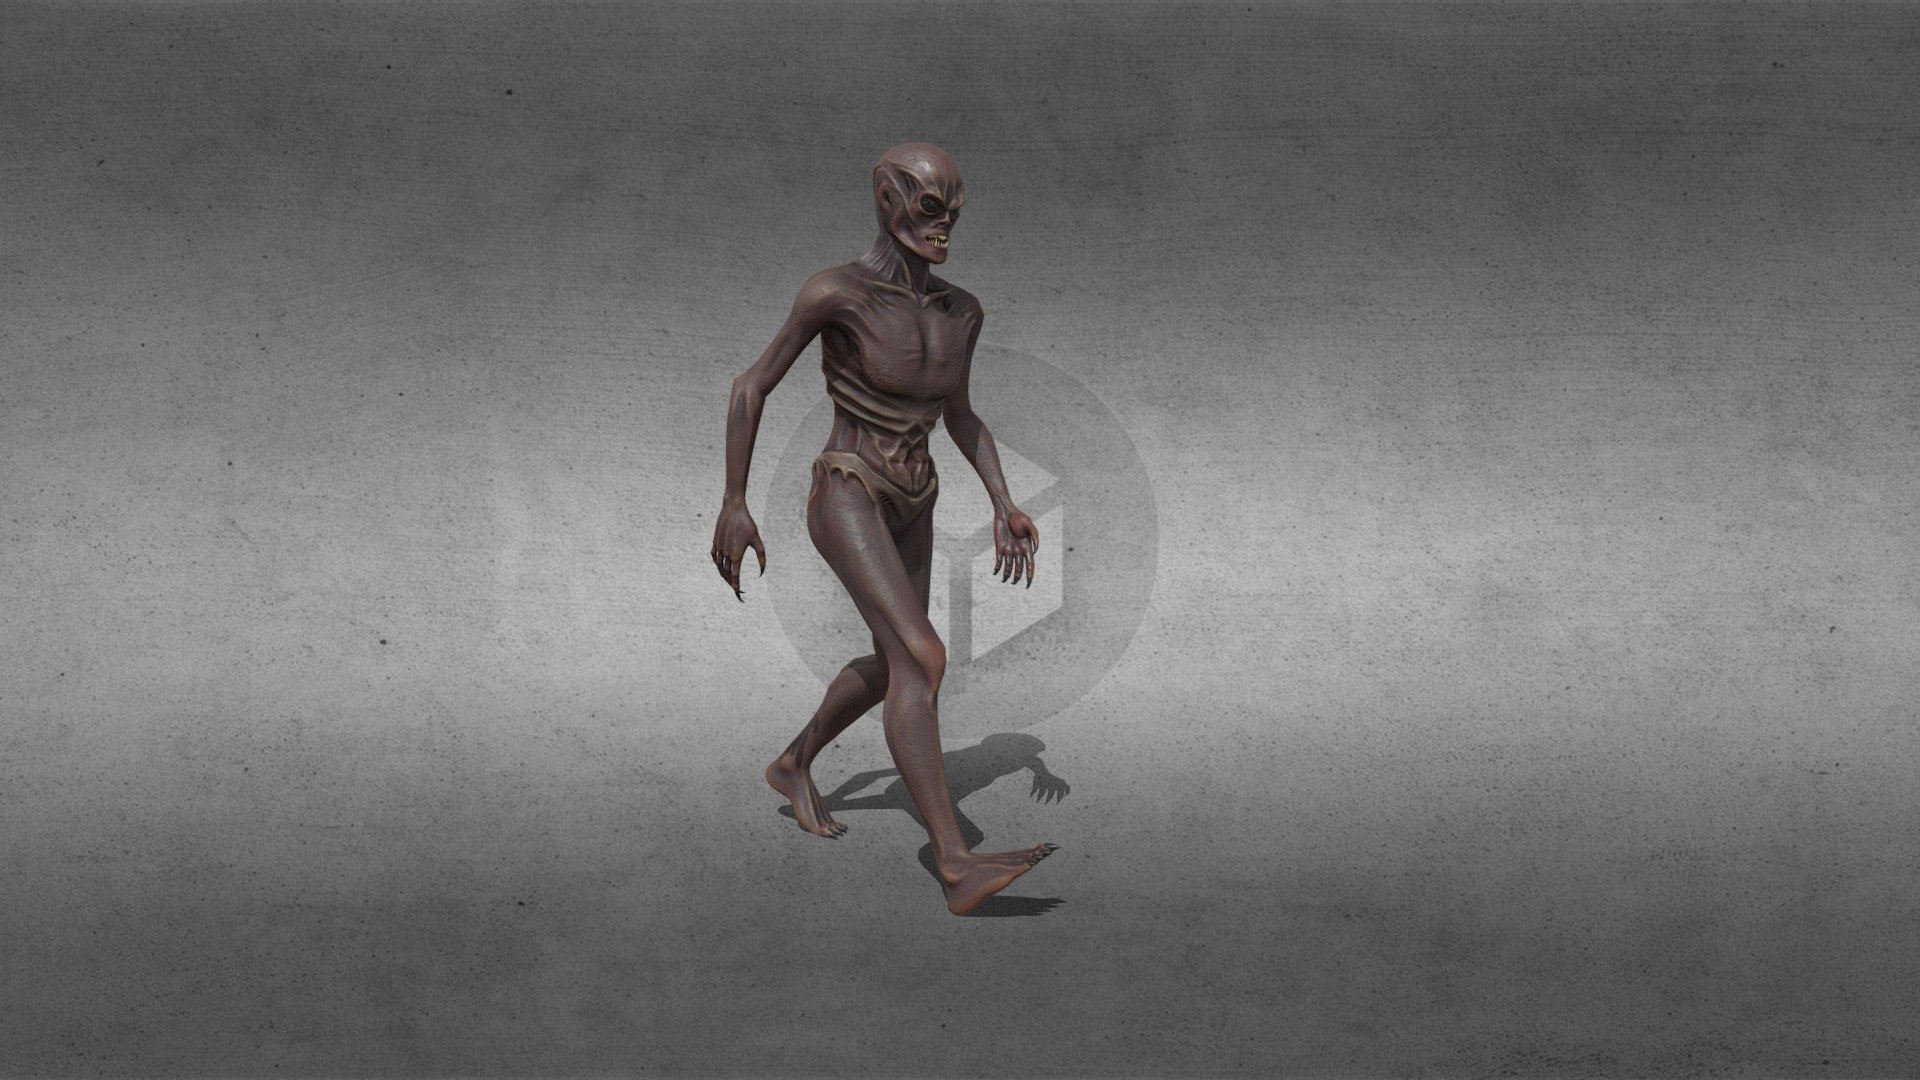 Low-poly model of the character Alien monster, Suitable for games of different genre: RPG, strategy, first-person shooter, etc.

The model contains:

faces: 7502

verts: 7321

tris: 14350

Package files description: 

Blender (base mesh and animations)

Project Unity: Rig Humanoid Avatar(all animations included)

Project Unreal: Rigged to Epic Skeleton(all animations included) - Alien Soldier - 3D model by Konstantin Kaftaykin (@3dKostya) 3d model